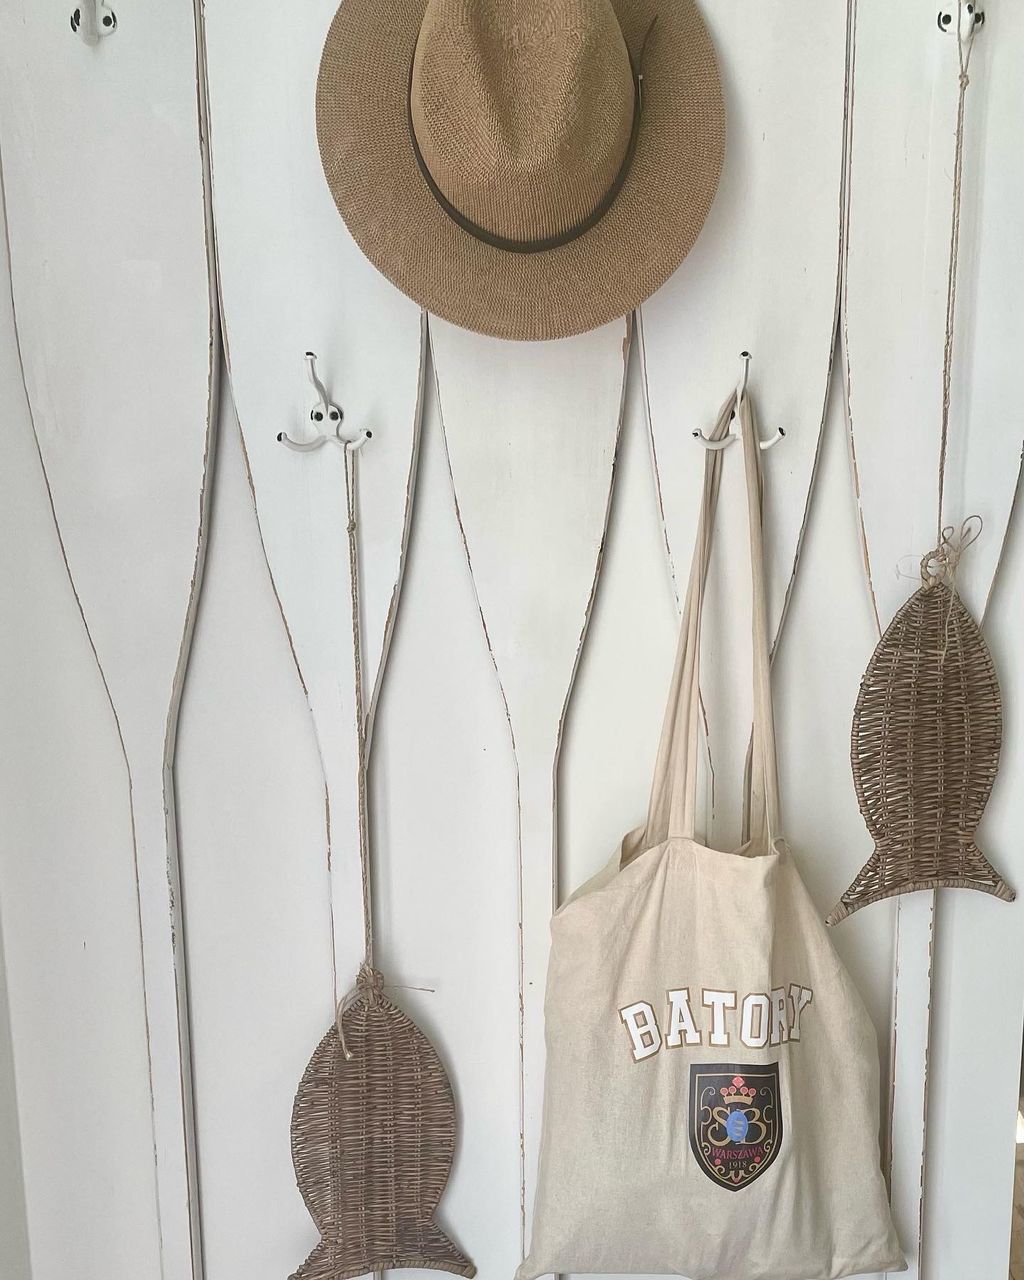 hanging, hat, fashion accessory, cowboy hat, clothing, no people, indoors, straw hat, sun hat, kitchen utensil, still life, wood, group of objects